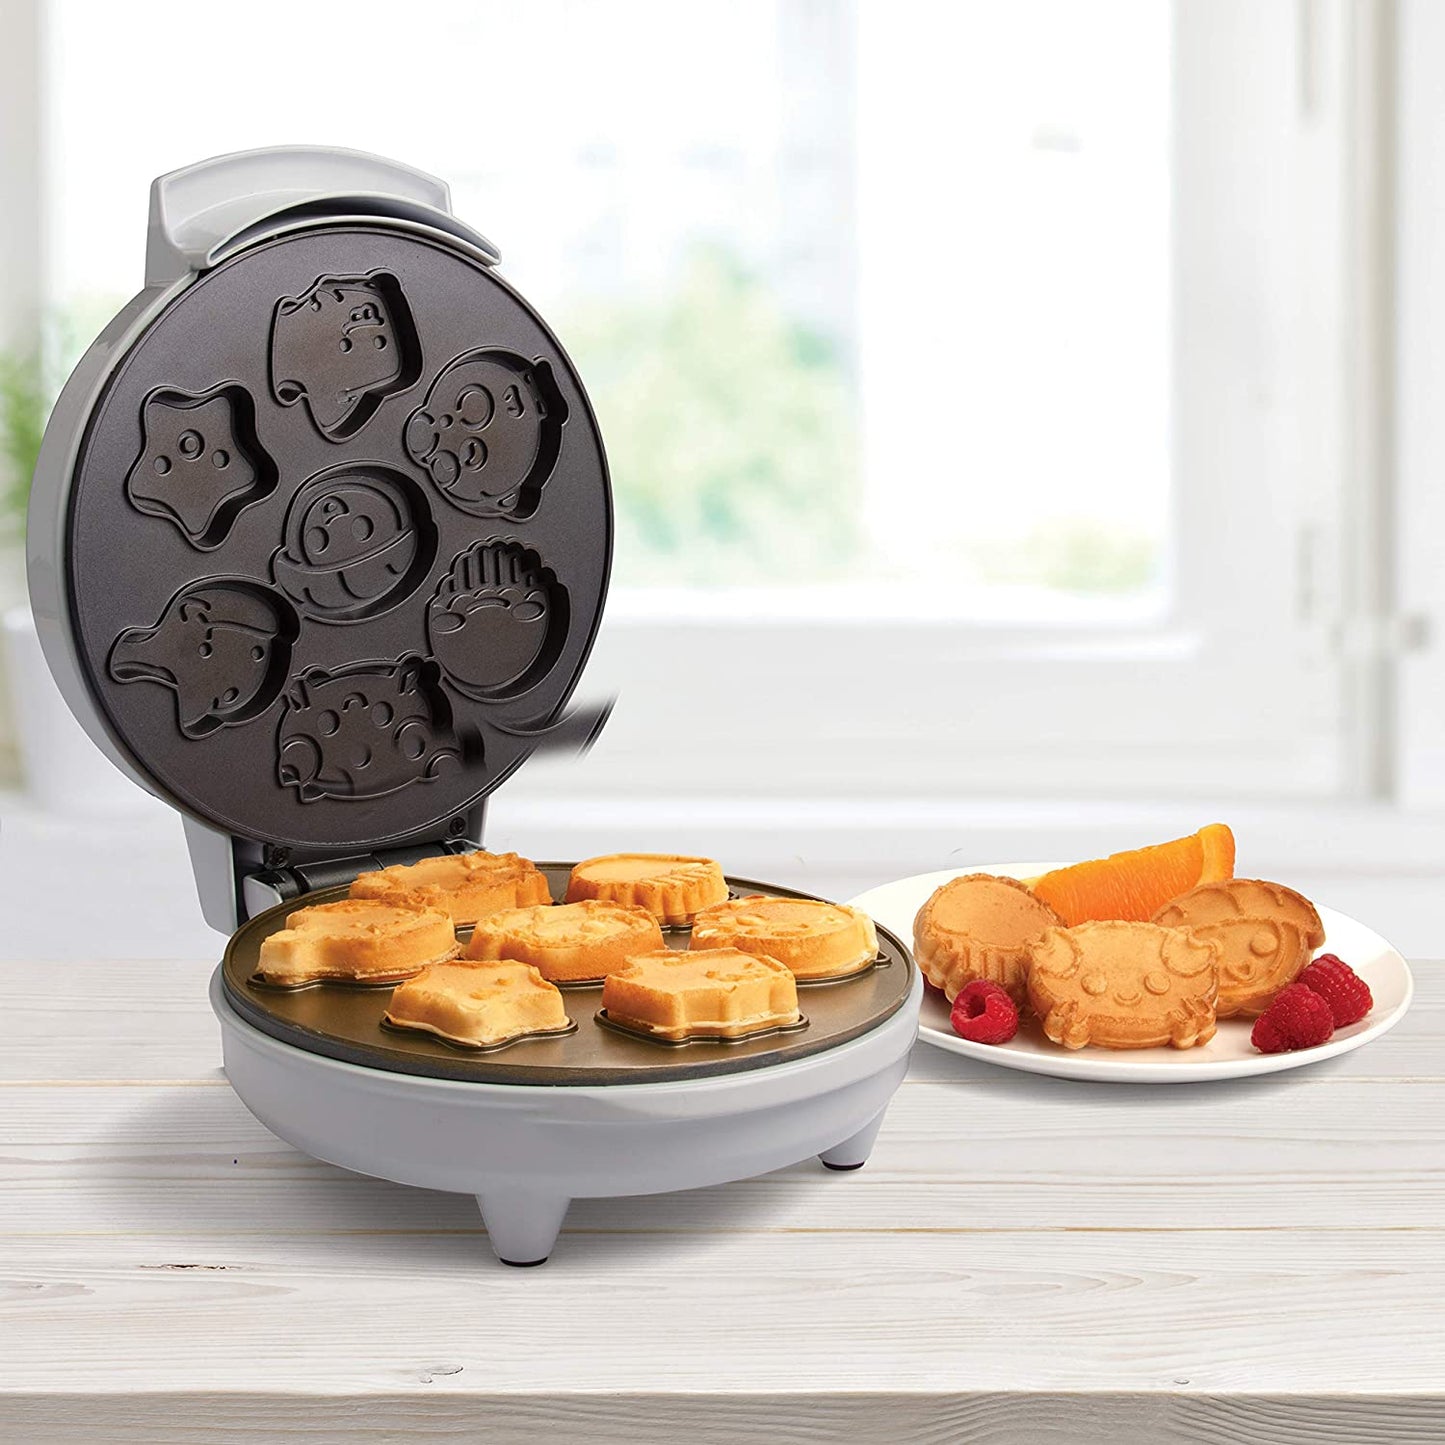 An electric waffle maker which makes sea creature shaped waffles for kids. There are cooked examples in the maker as well as on a white plate next to the waffle maker. They look delicious.